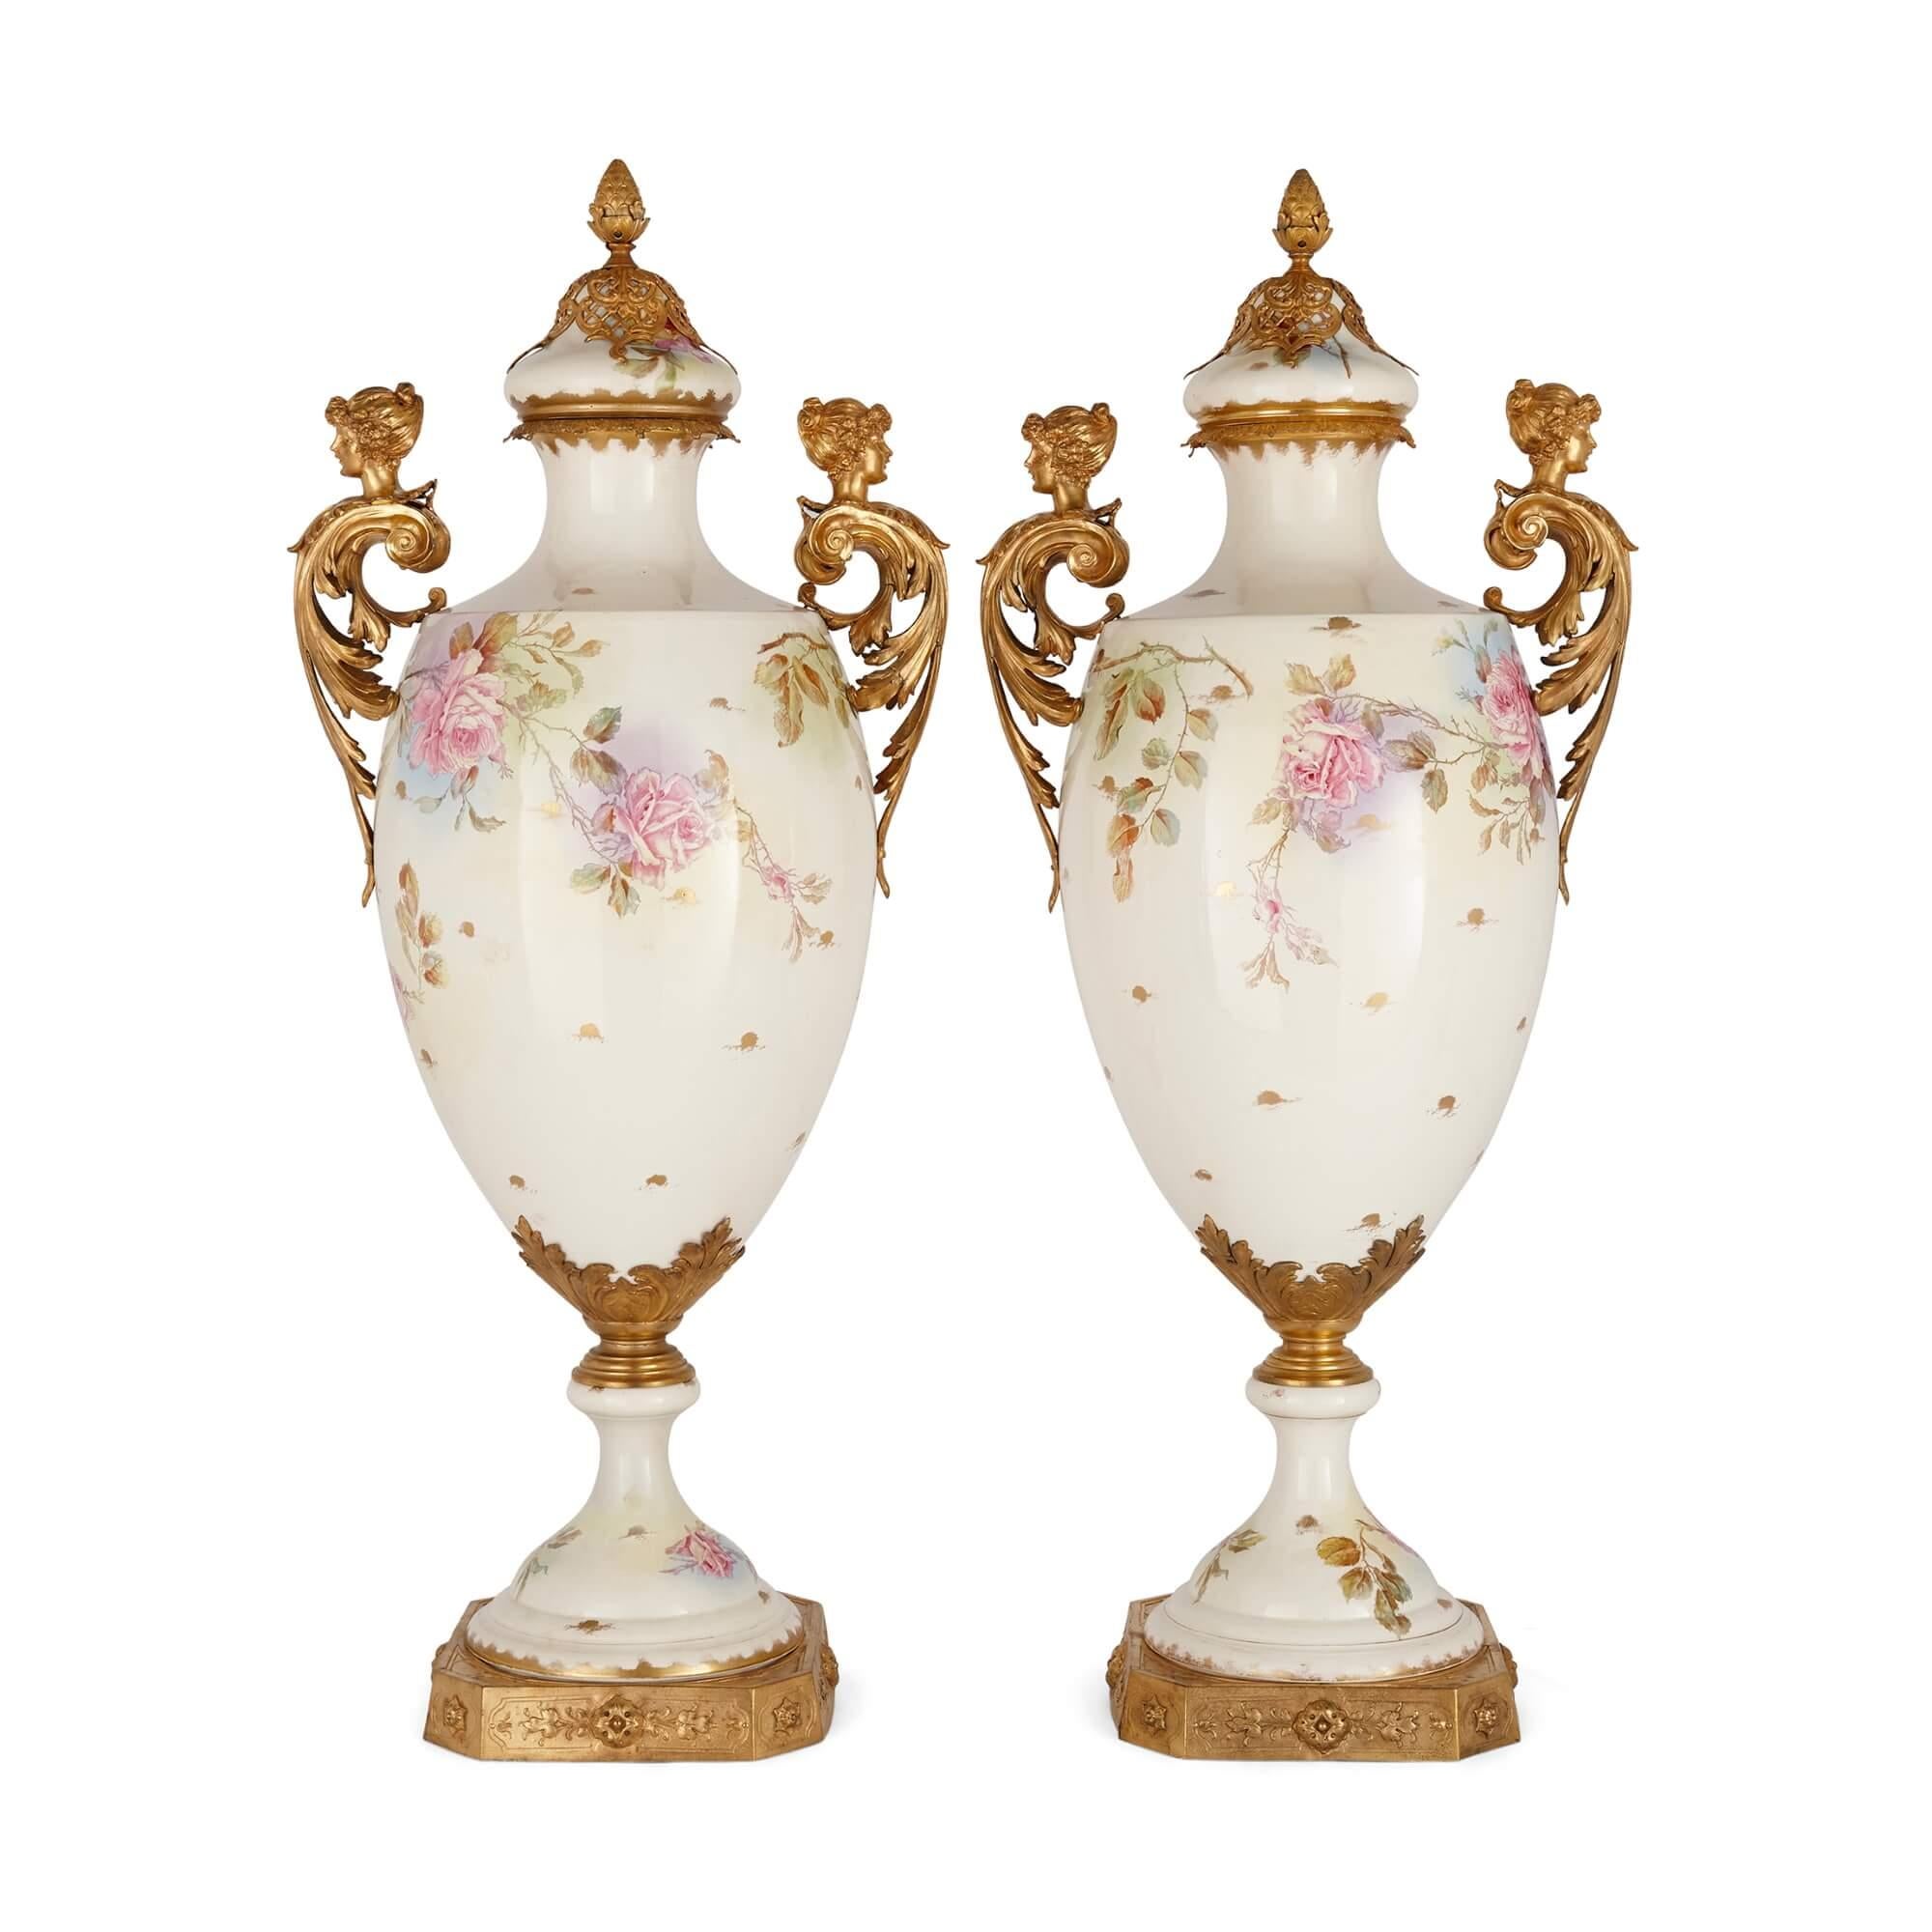 Pair of large Sèvres-style porcelain and gilt-metal vases.
French, 20th century
Measures: height 97cm, width 42cm, depth 30cm

With covers, elaborate gilt-metal mounts, florally painted decorative porcelain bodies, and square bases with canted